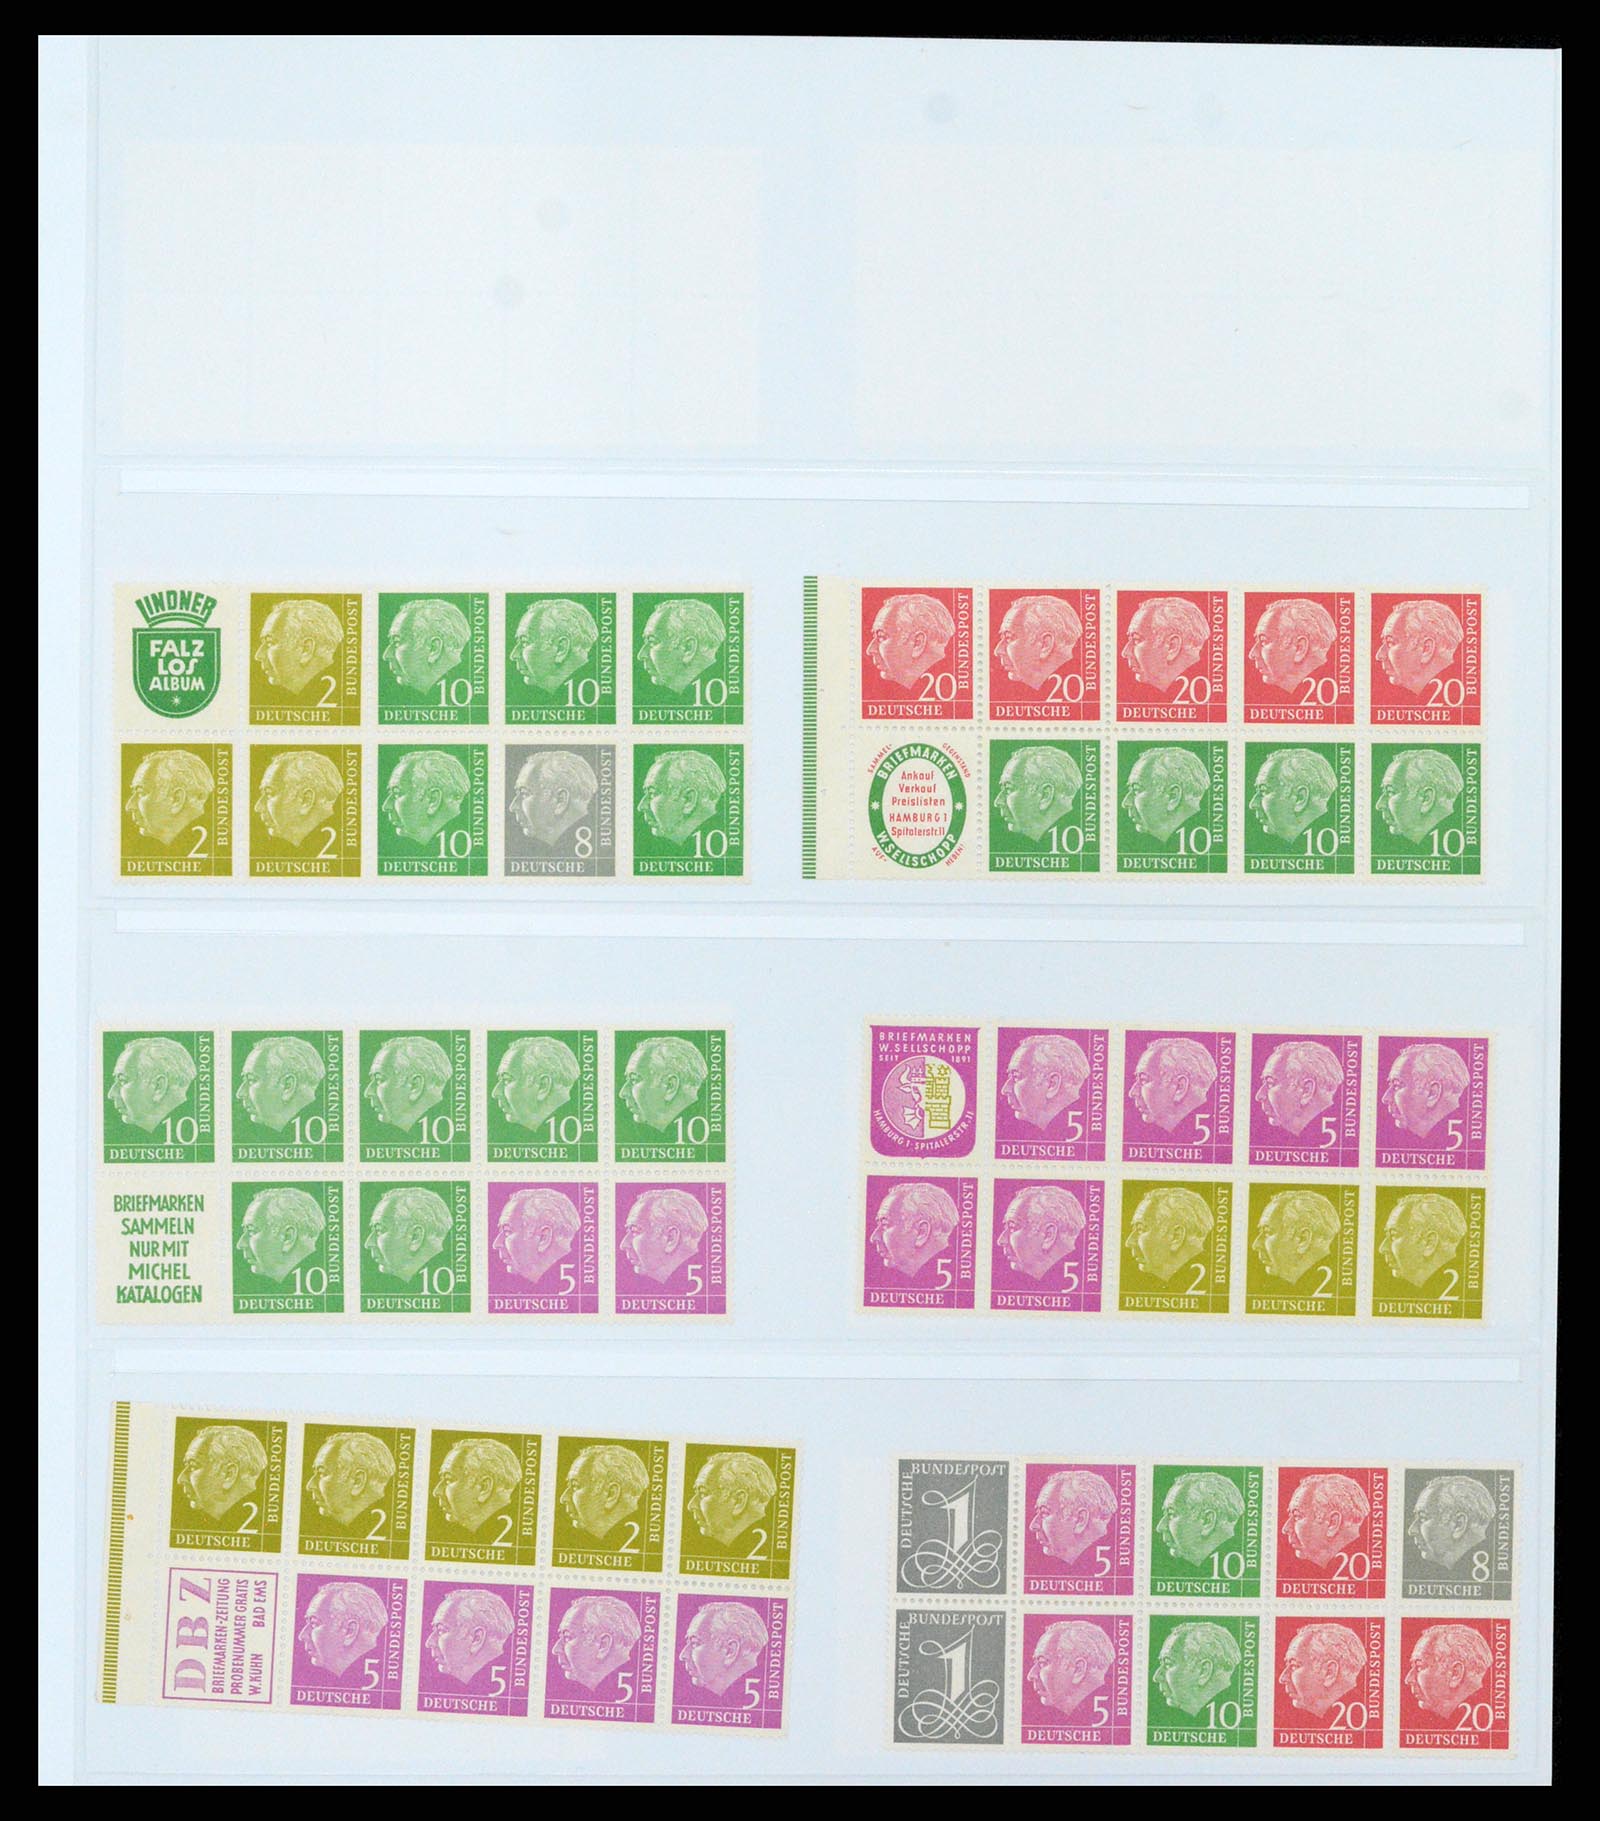 37336 017 - Stamp collection 37336 Bundespost combinations 1955-1980.